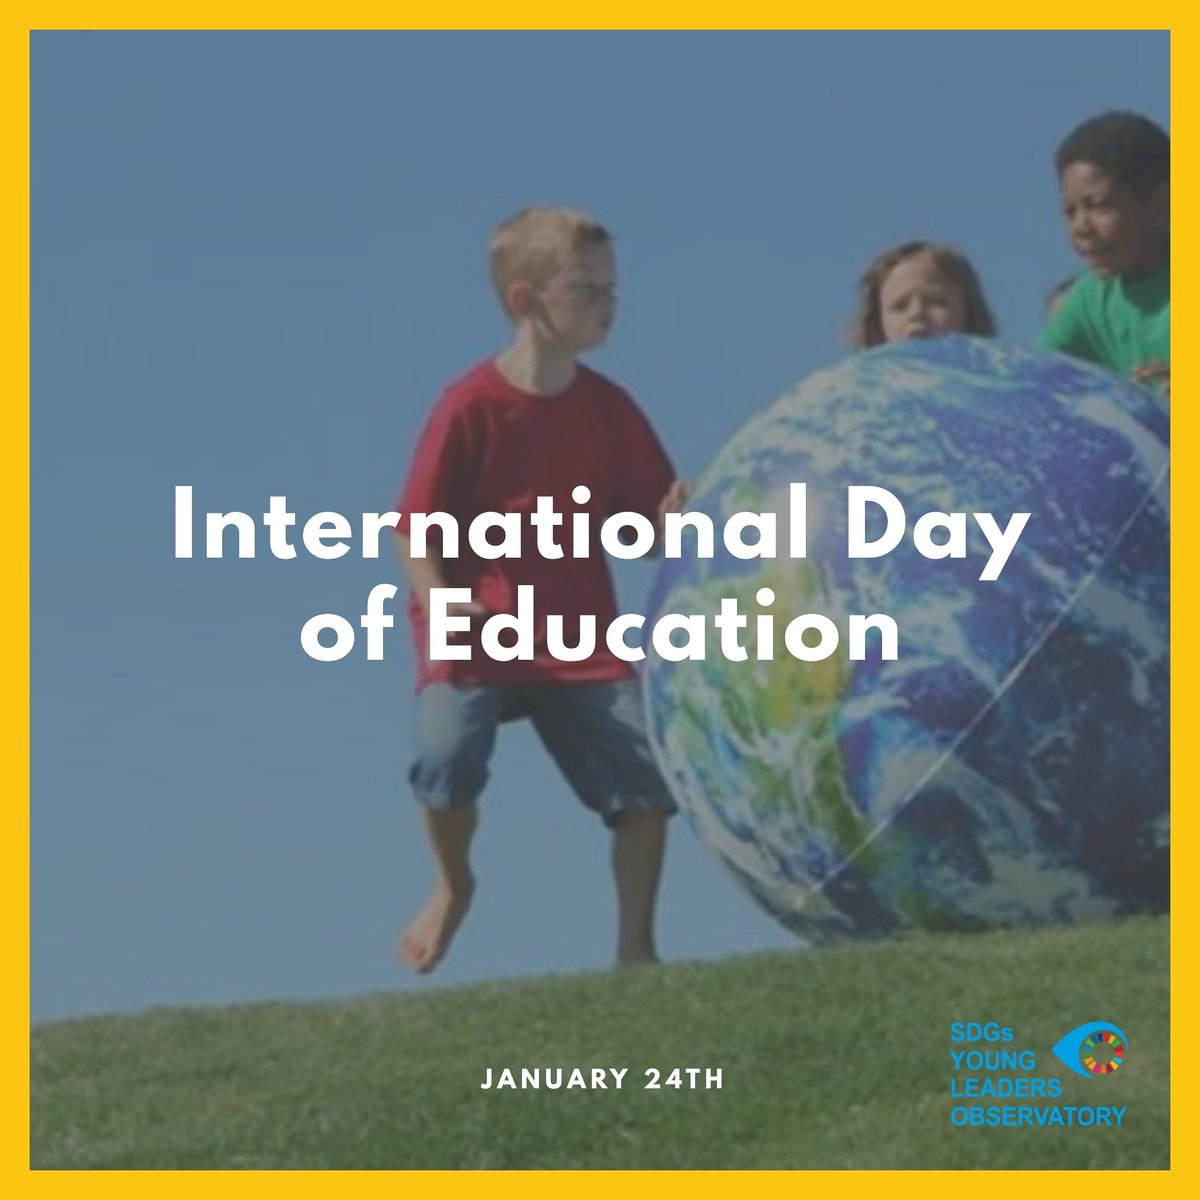 👨‍🏫👩‍🏫
#Education is a human right, a public good and a public responsability.
#InternationalDayOfEeducation 
.
#InternationalEducationDay 
#DíaInternacionalDeLaEducación
#Goal4 #ODS4
.
@UNICEFEducation @UNESCO @ONU_es @IPNEducation @ICL_Foundation @EduCannotWait @TheWorldsLesson